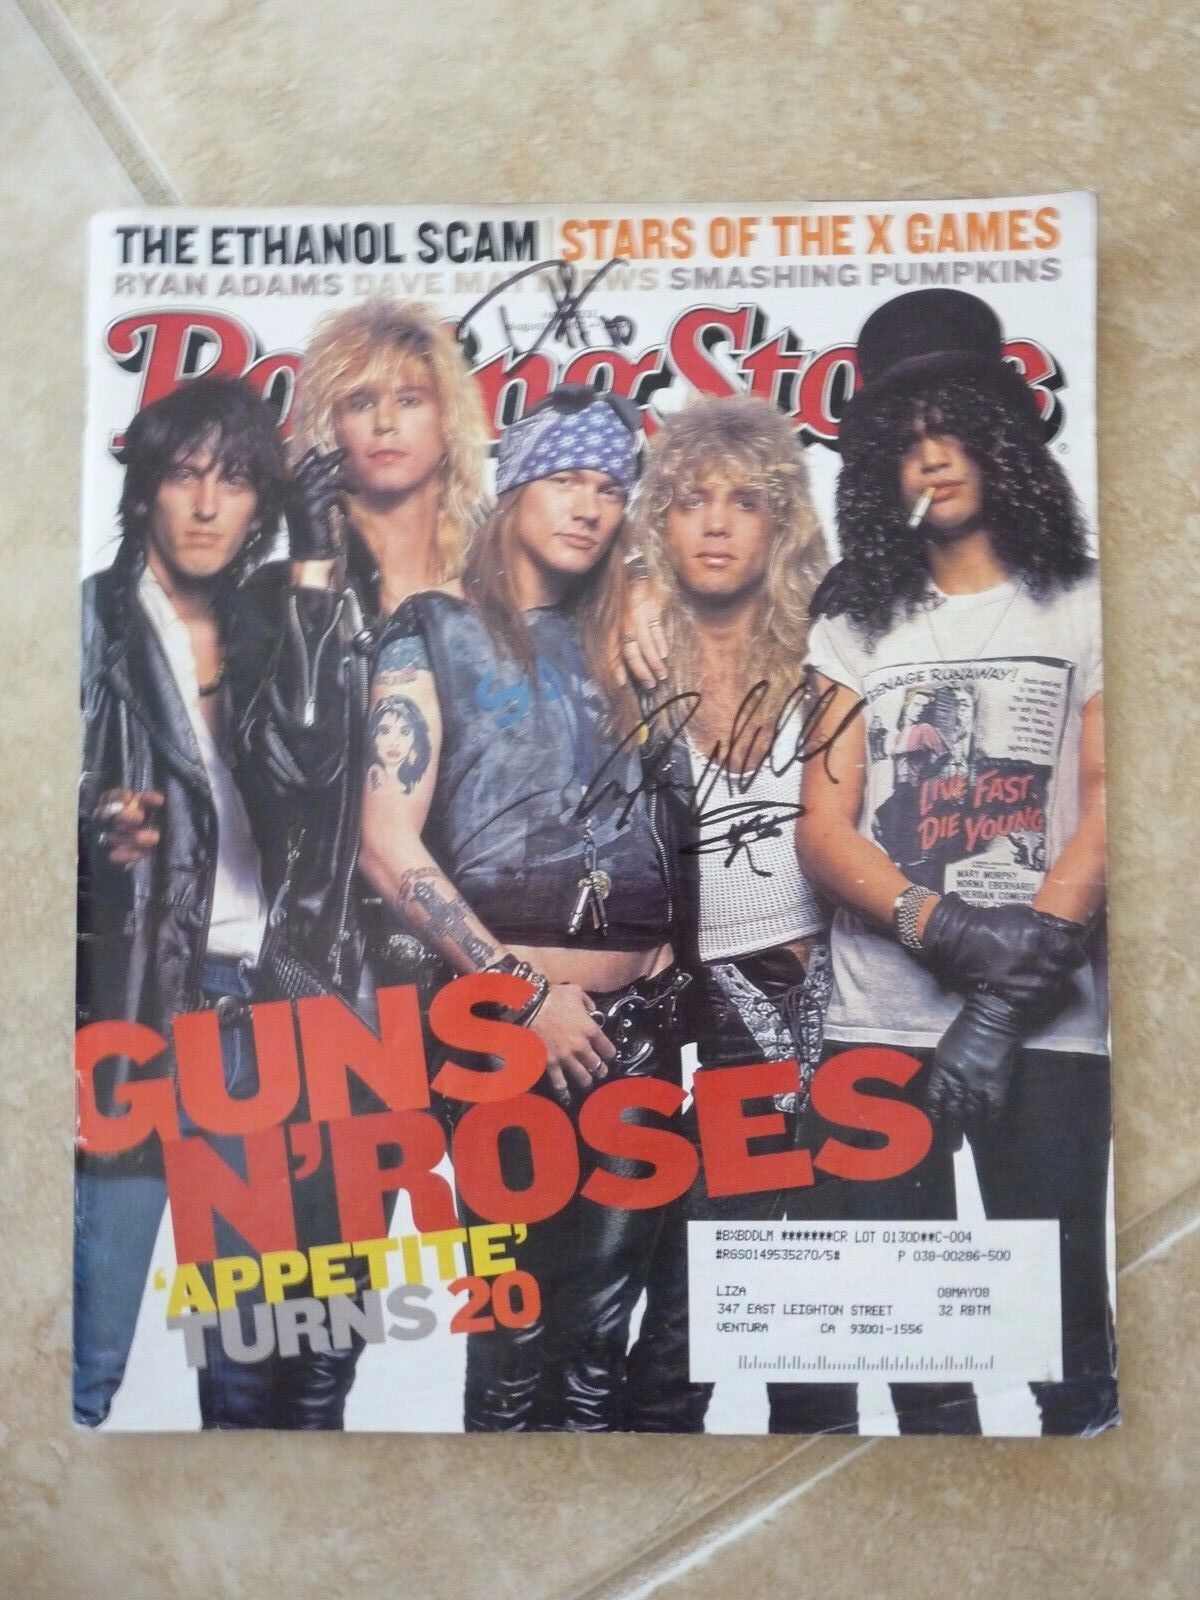 Guns Roses Duff & Steven Signed Rolling Stone Magazine Cover Photo Poster painting PSA Guarantee